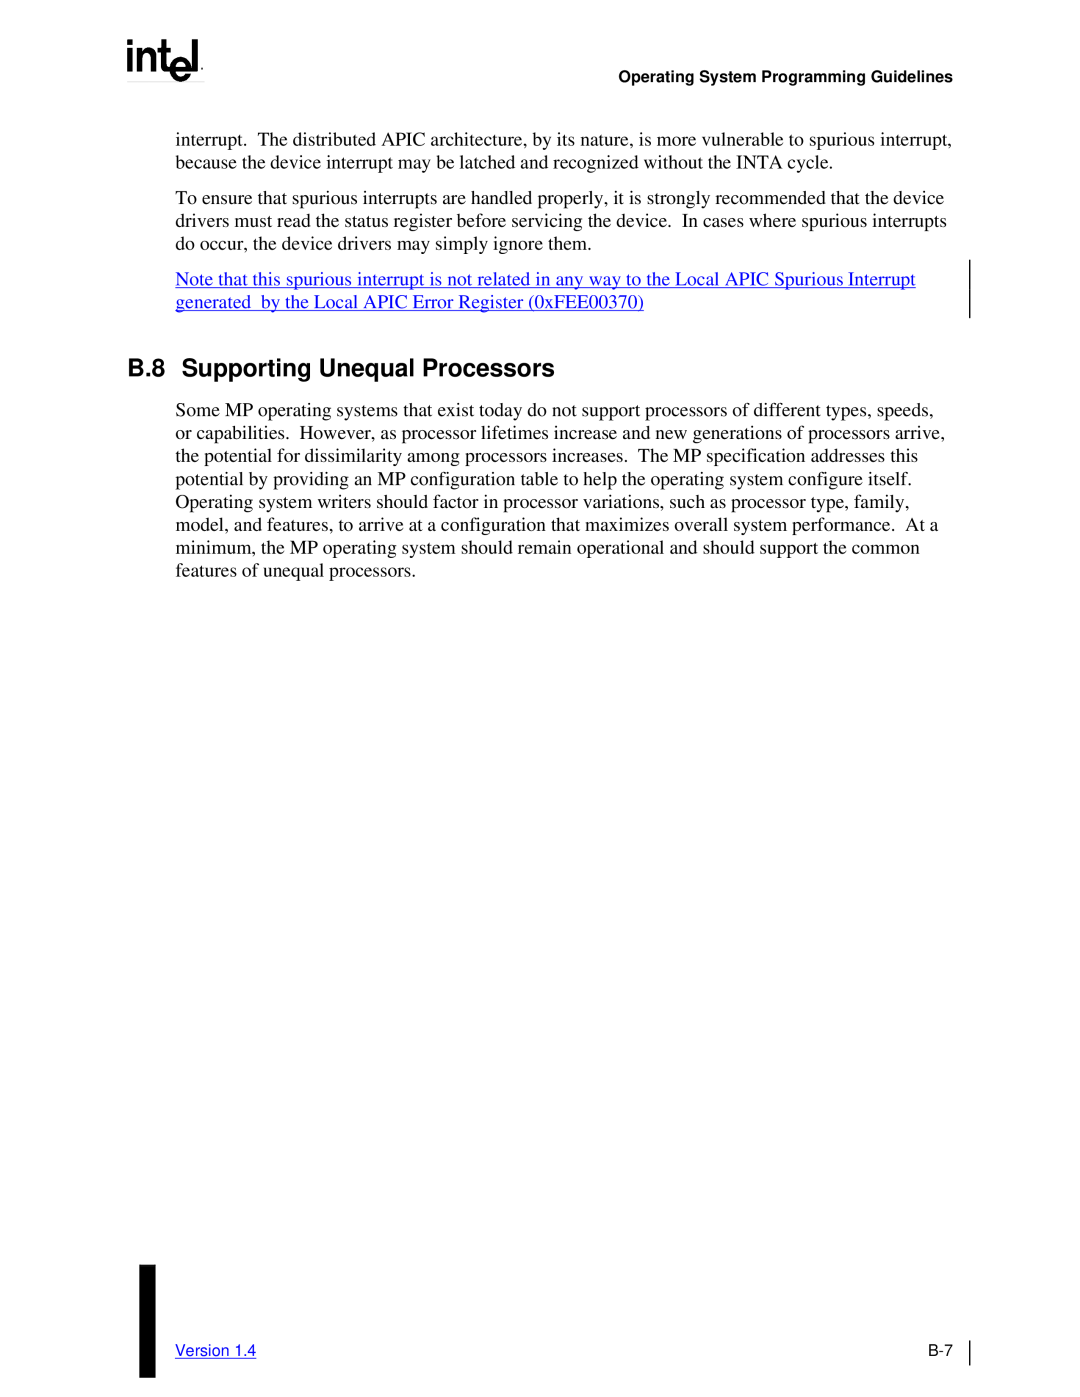 Intel MultiProcessor manual B.8 Supporting Unequal Processors, Version 